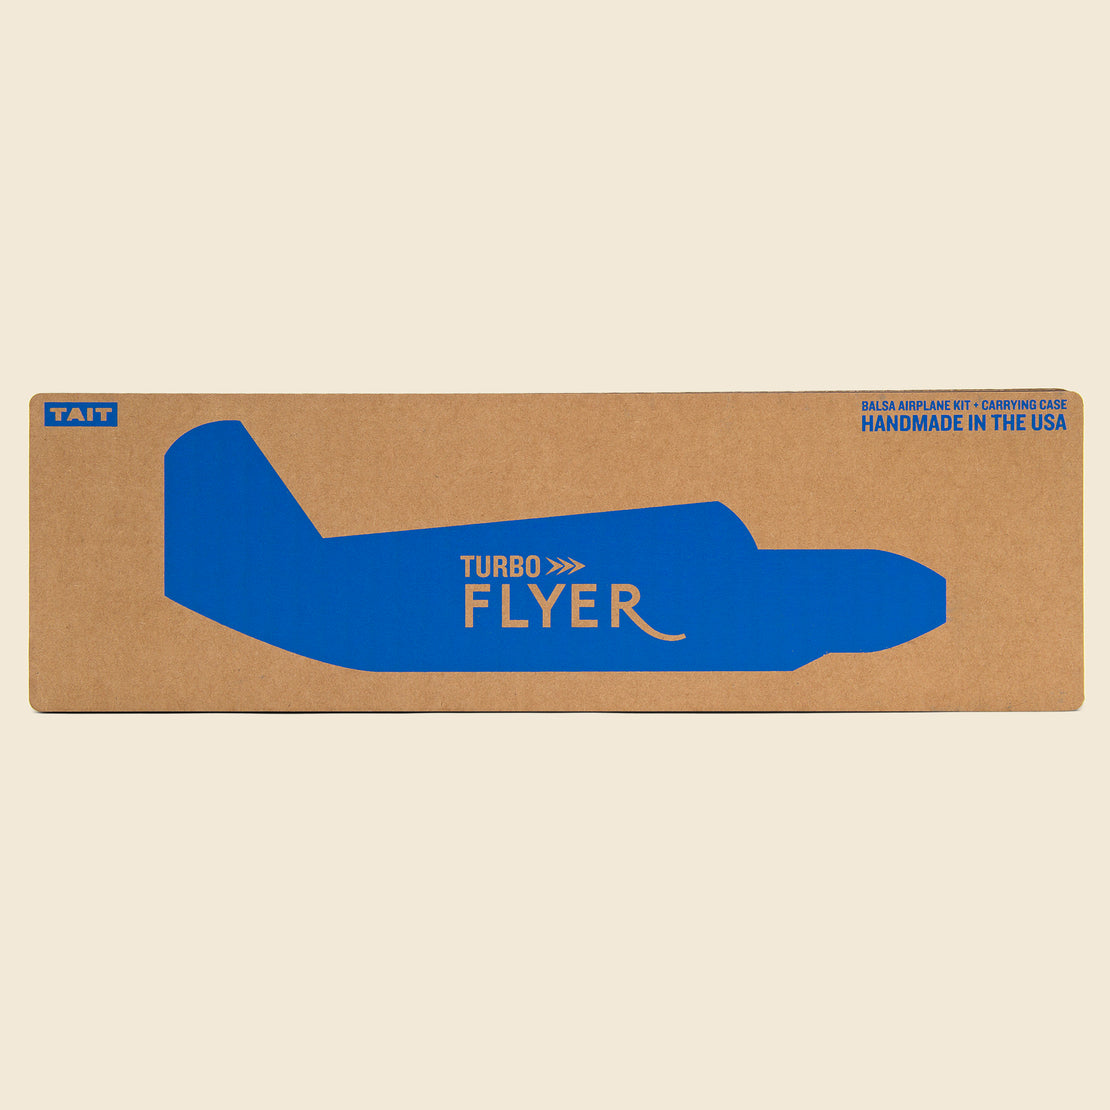 Turbo Flyer Balsa Airplane Kit - Blue - Home - STAG Provisions - Home - Art & Accessories - Decorative Object